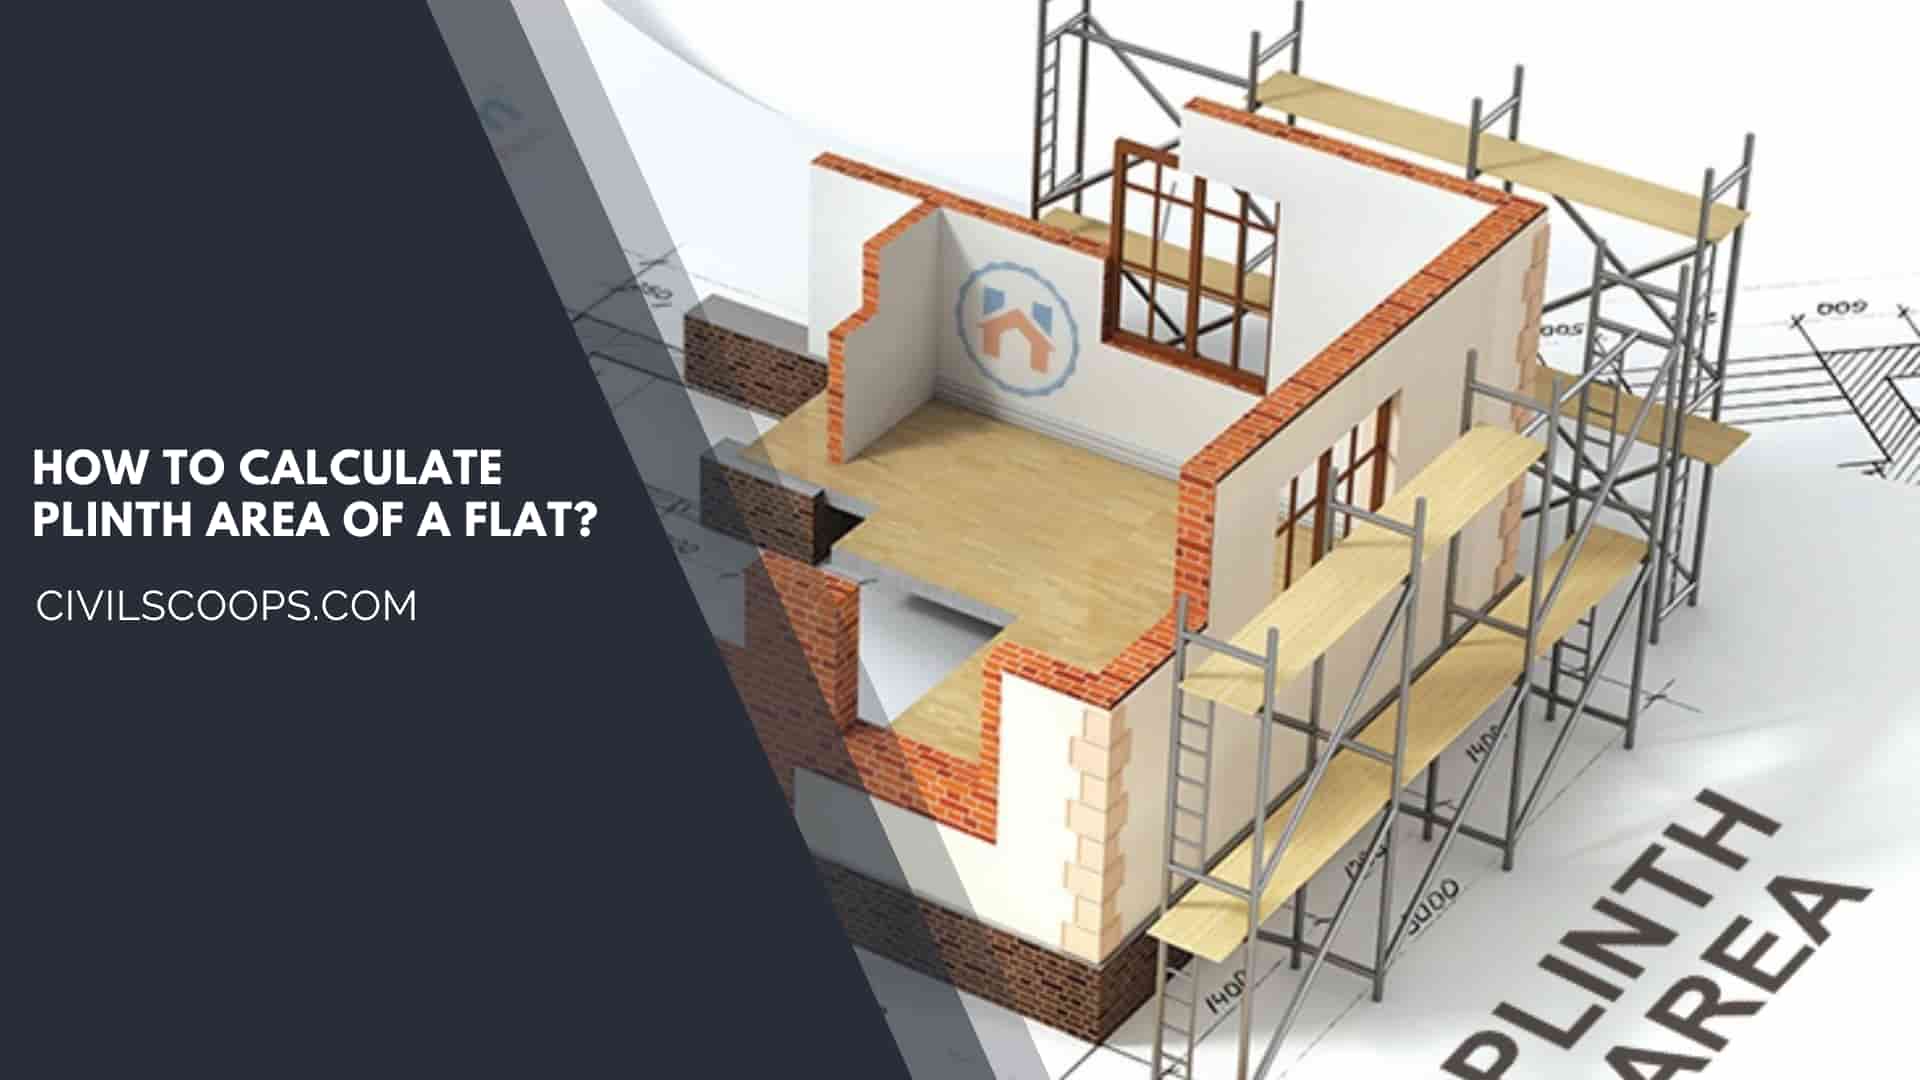 How to Calculate Plinth Area of a Flat?